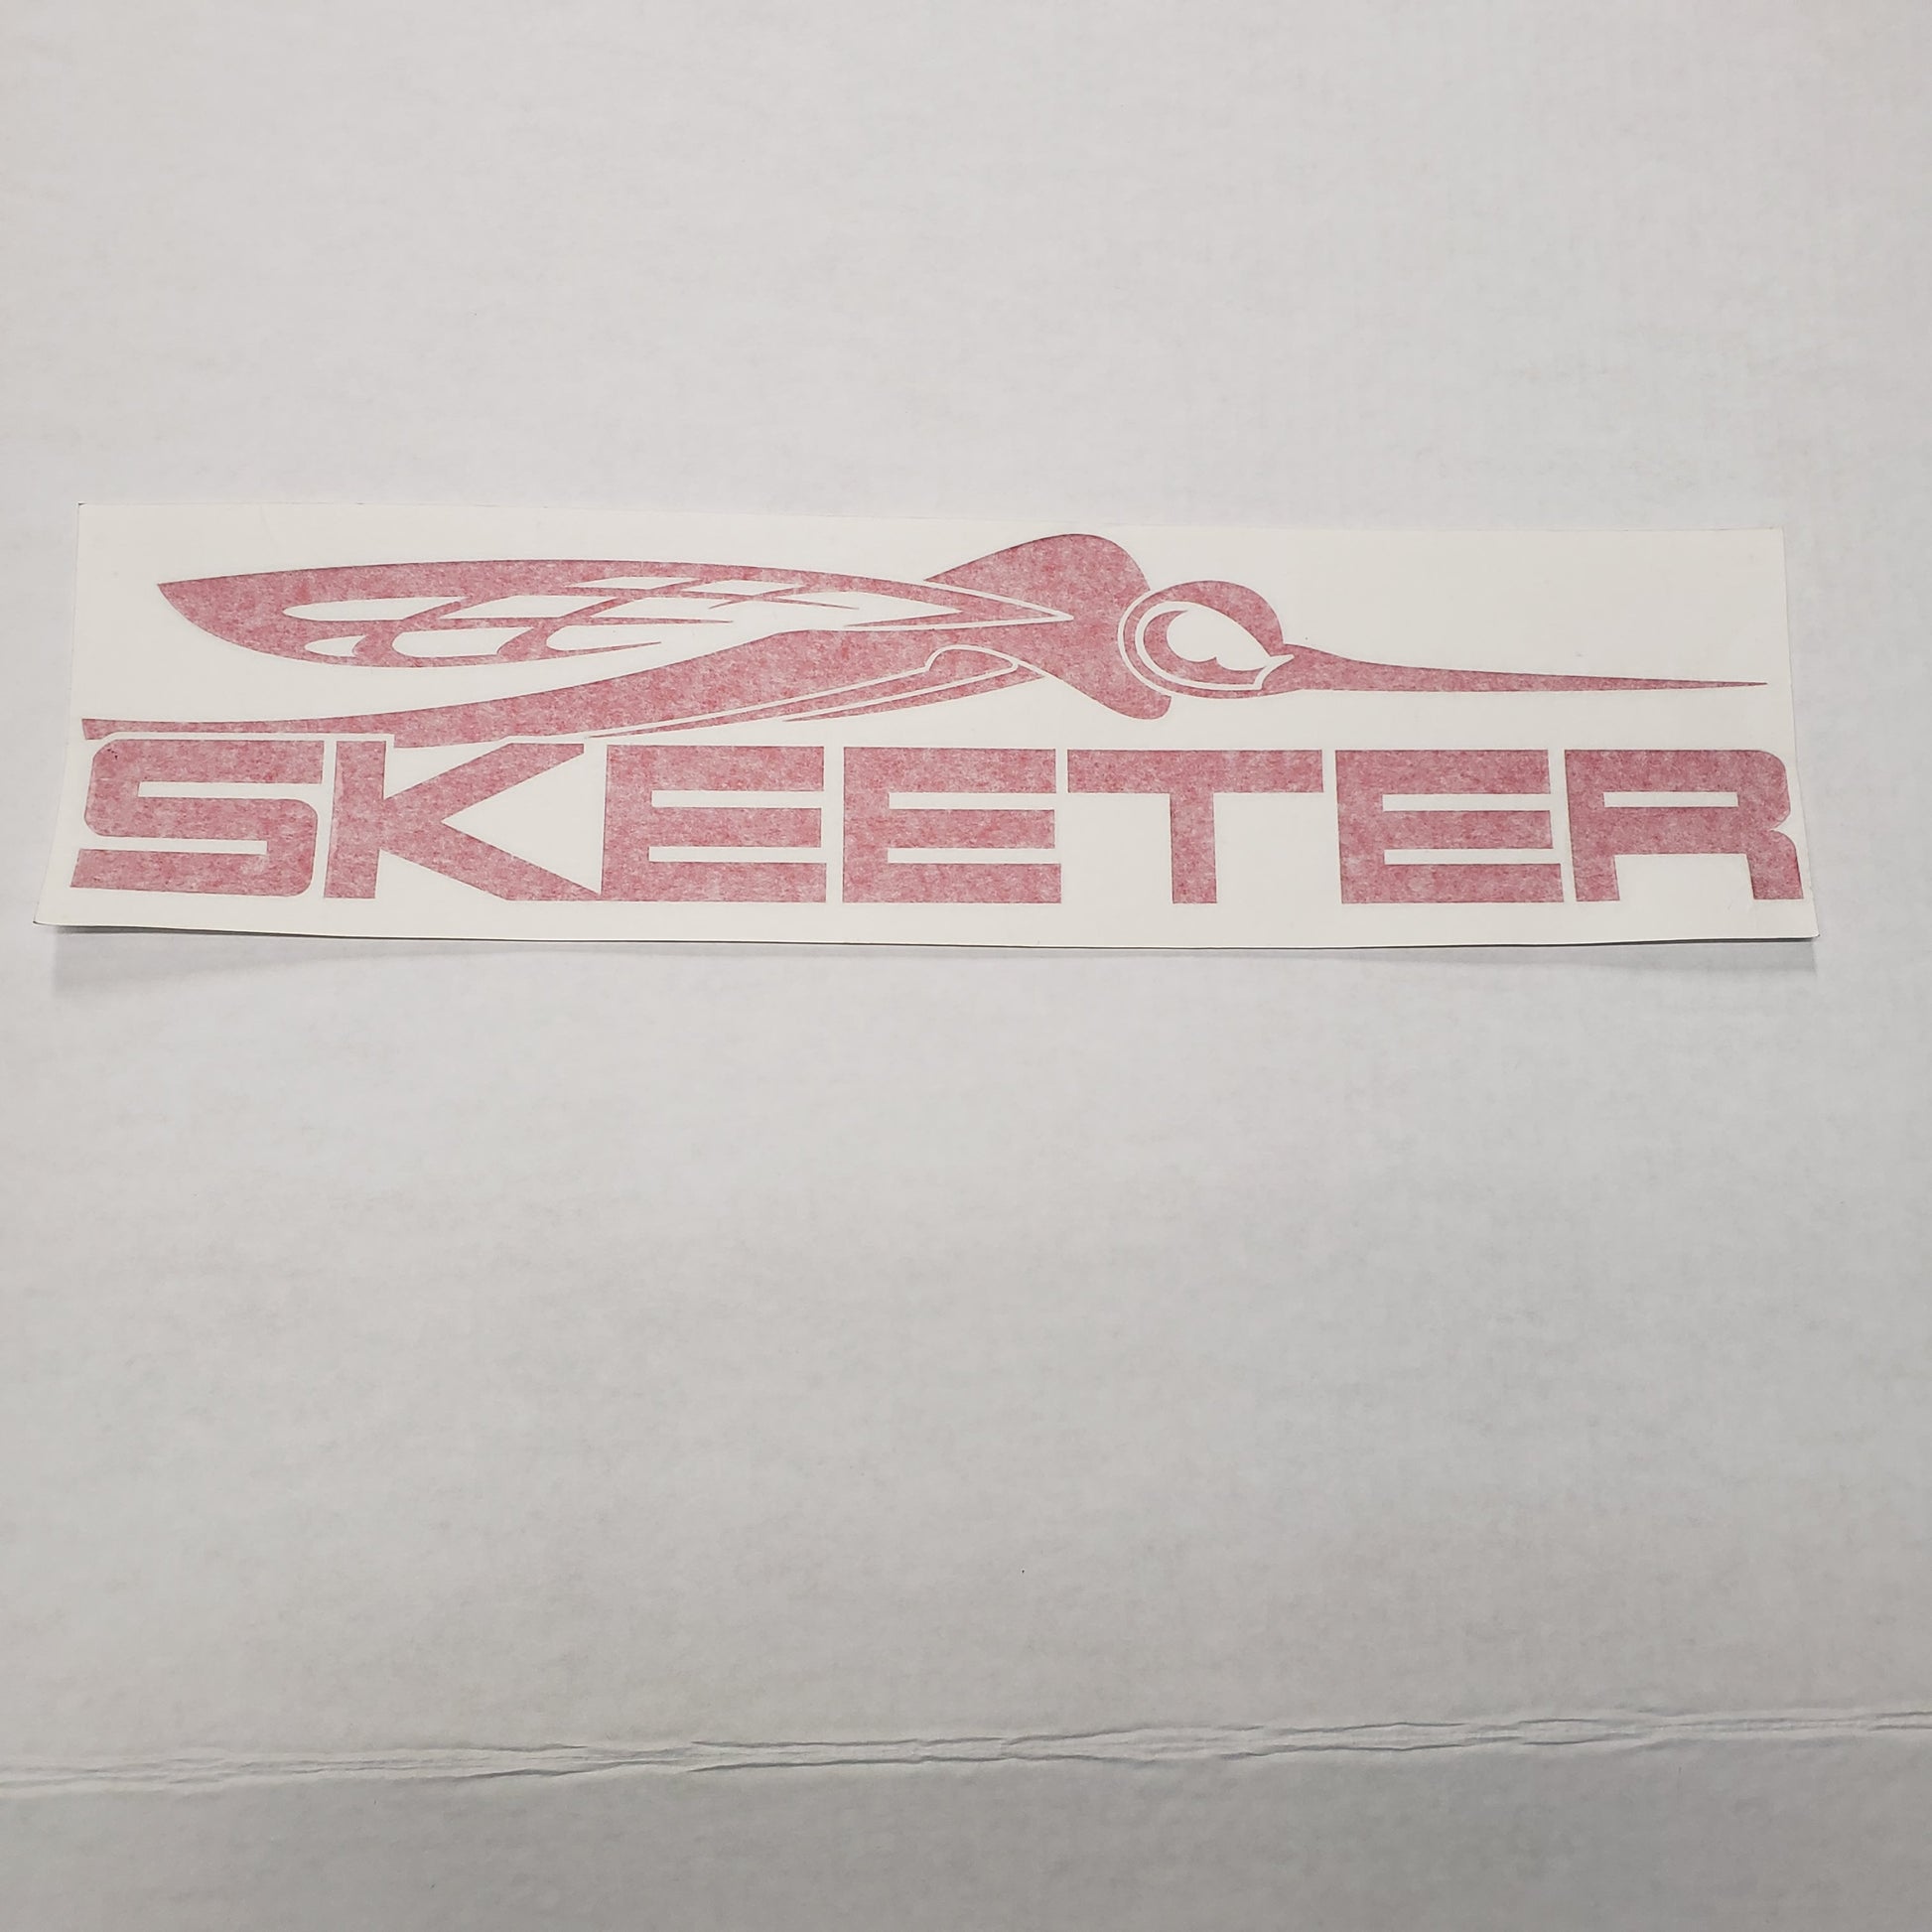 New Authentic Skeeter Chrome Decal 17 X 4 1/2